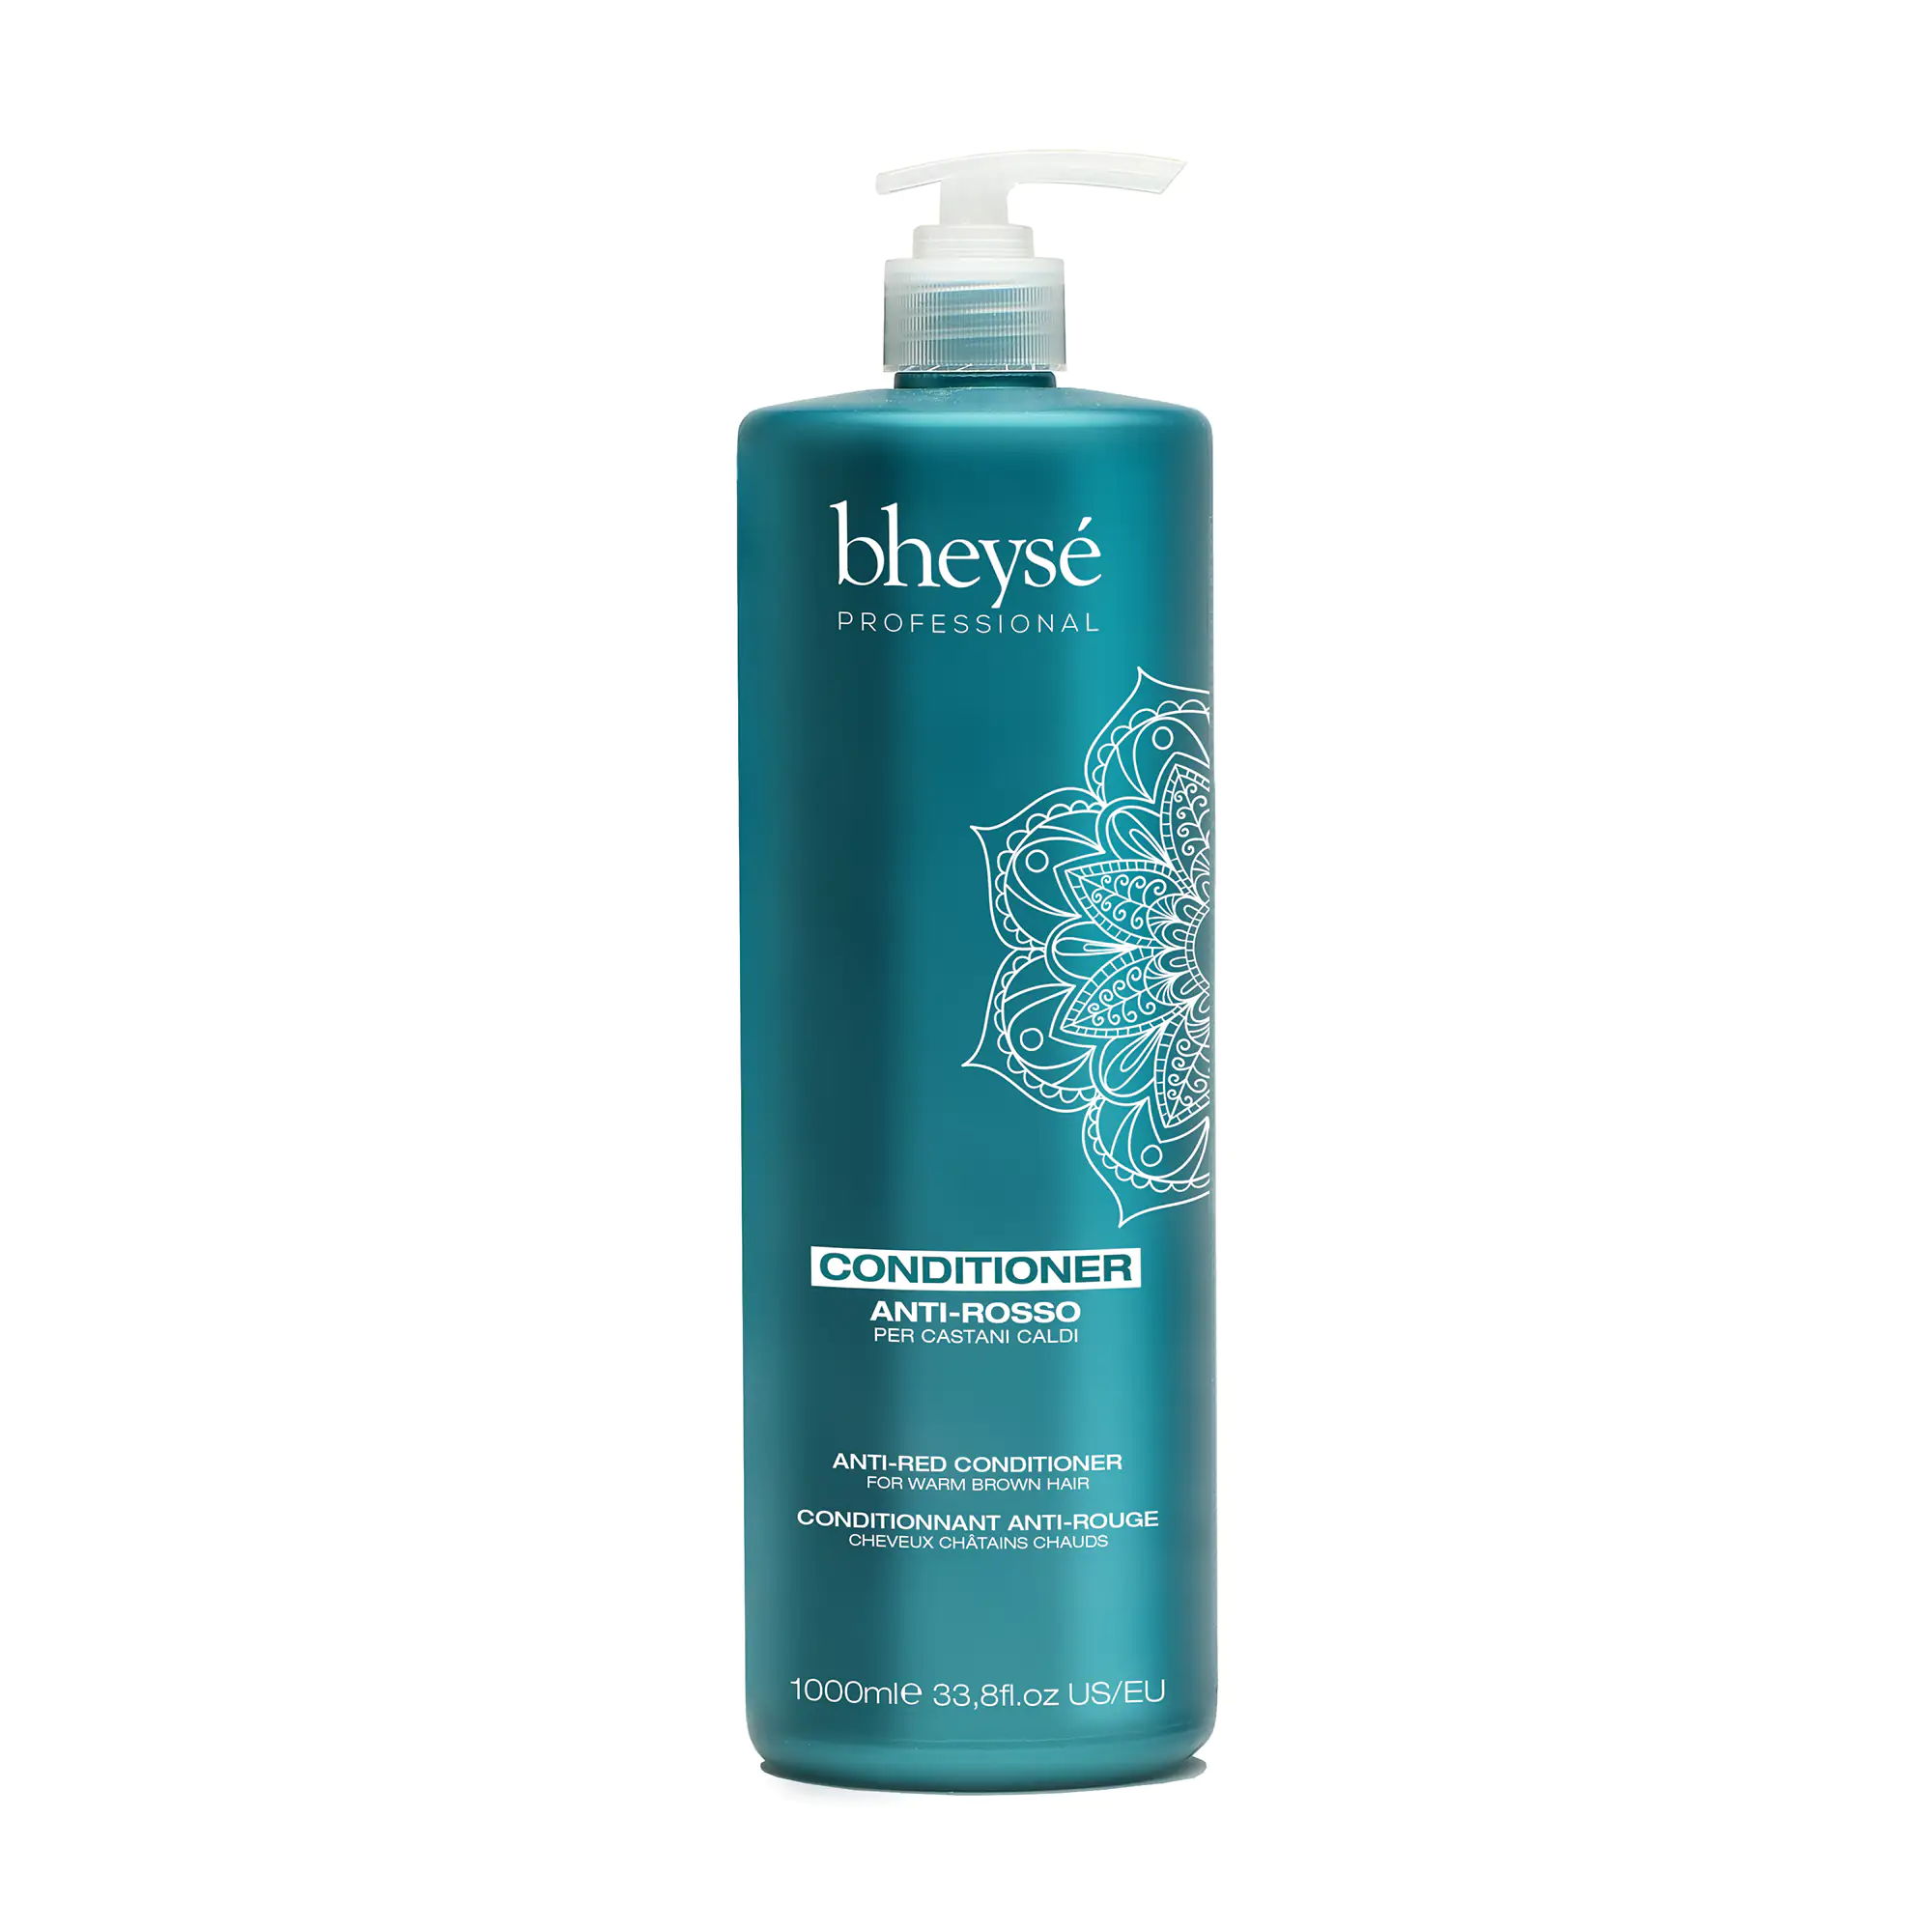 Bheyse Conditioner No-Red 1000ml - Femme Fatale - Bheyse Conditioner No-Red 1000ml